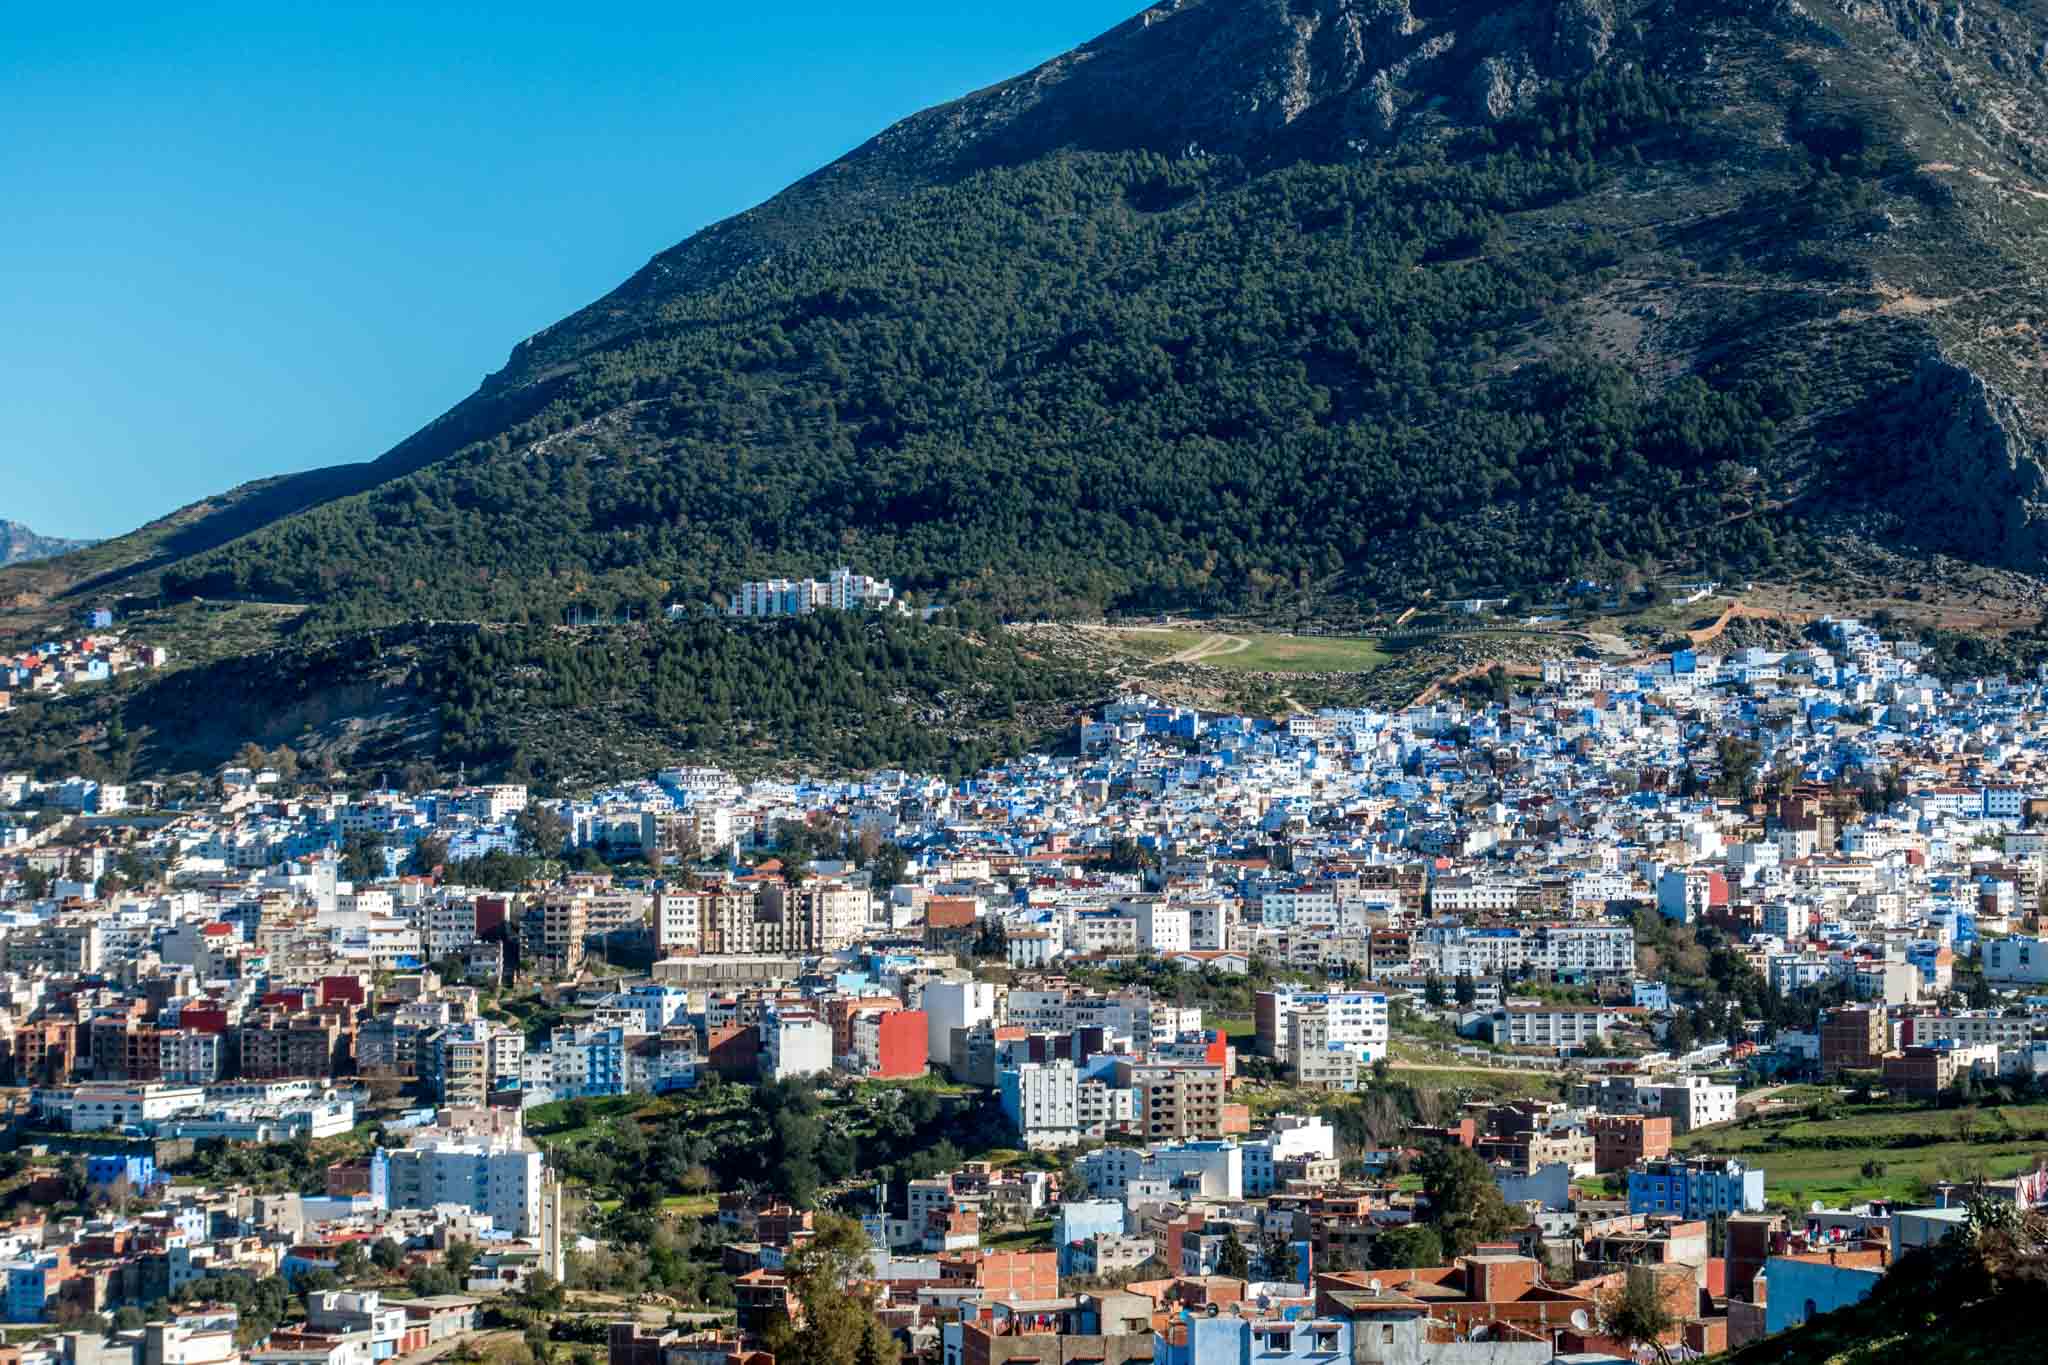 Panoramic view of Chefchaouen Morocco, in the Rif Mountains.